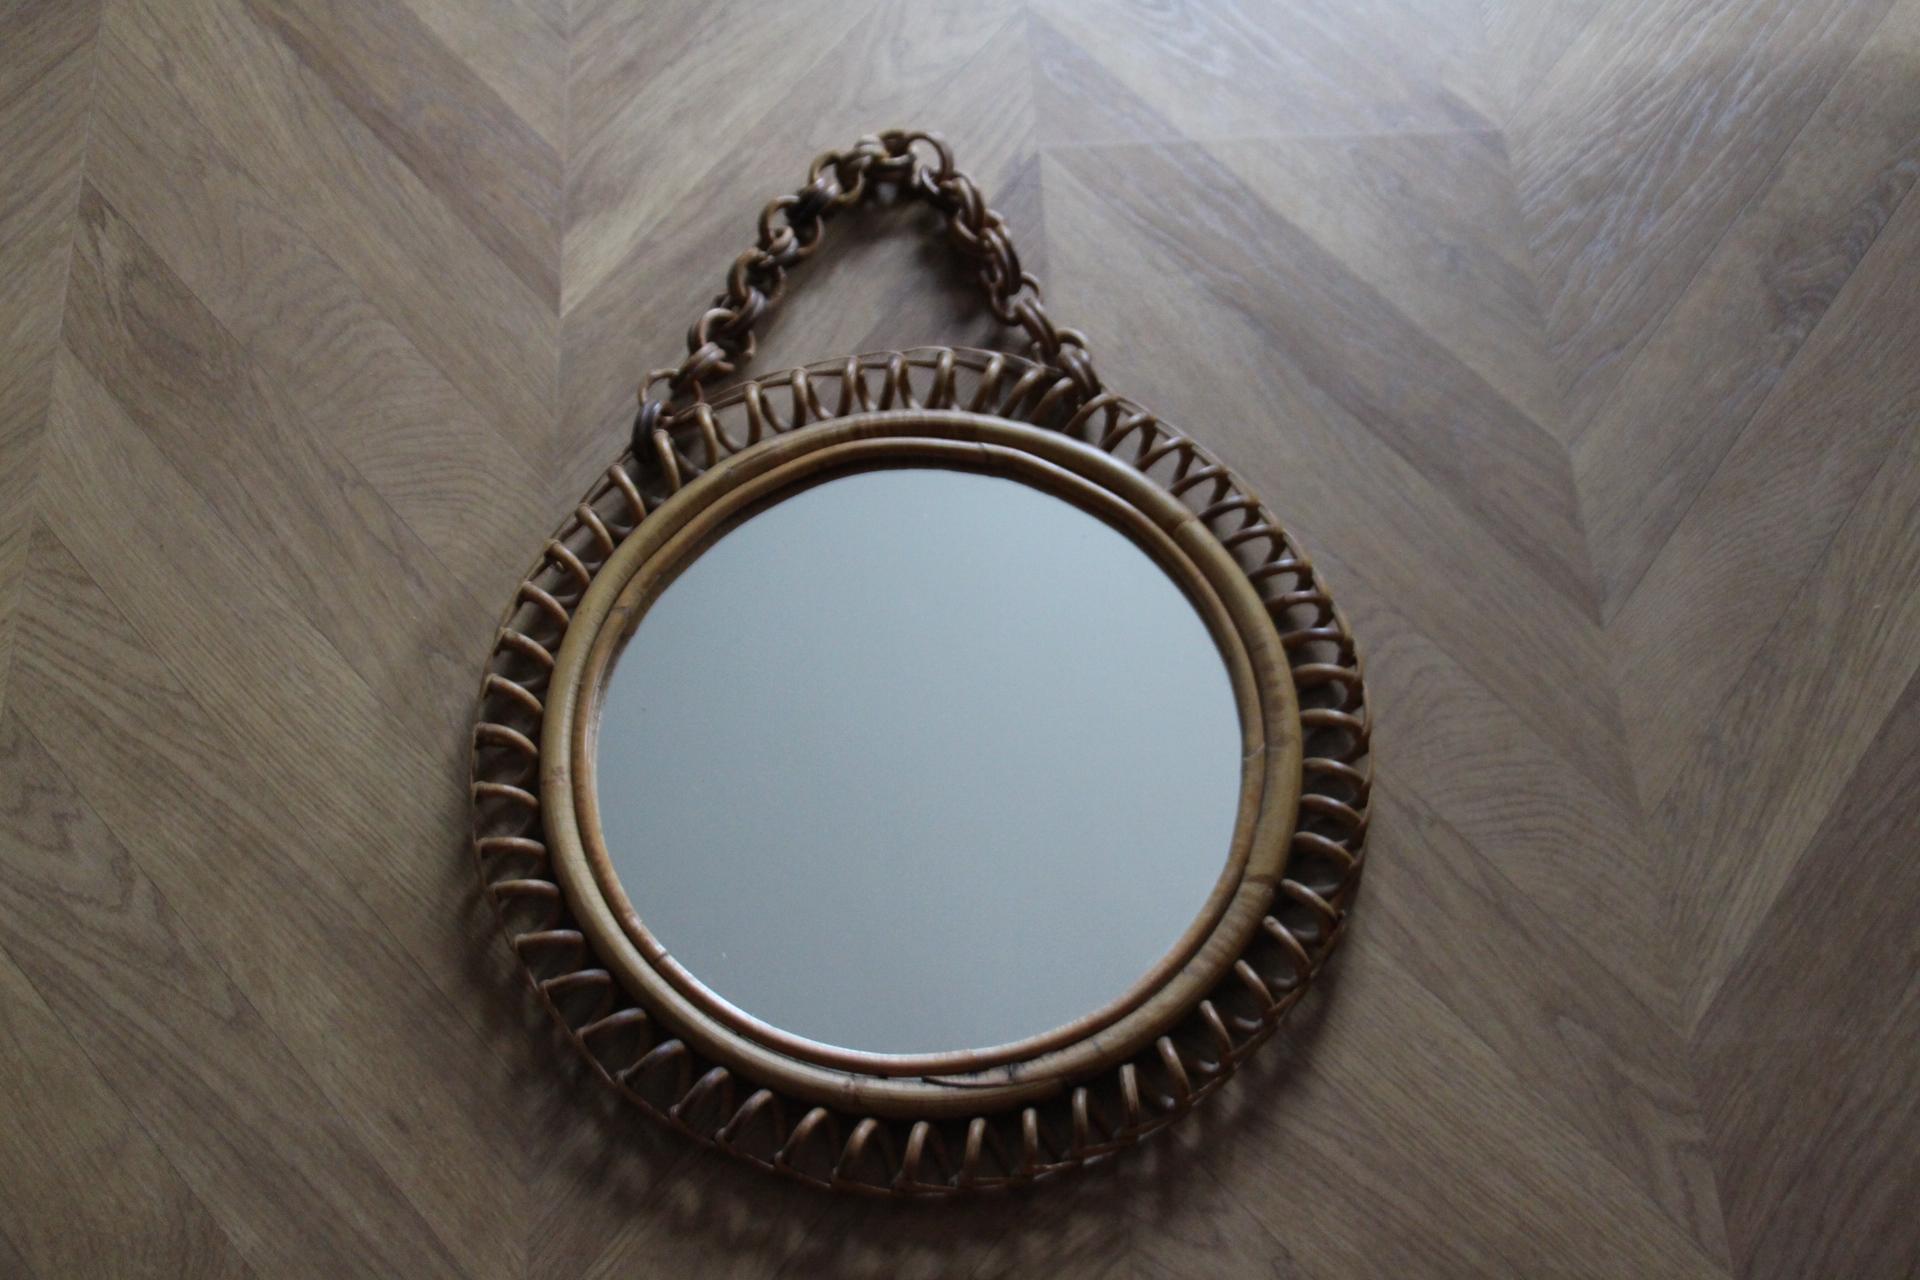 This very decorative mirror was made in Italy in 1960s. It is typical of this period design and is all original. It was handcrafted and is in perfect condition. It has got a beautiful round shape. It comes with its original matching rattan hanging